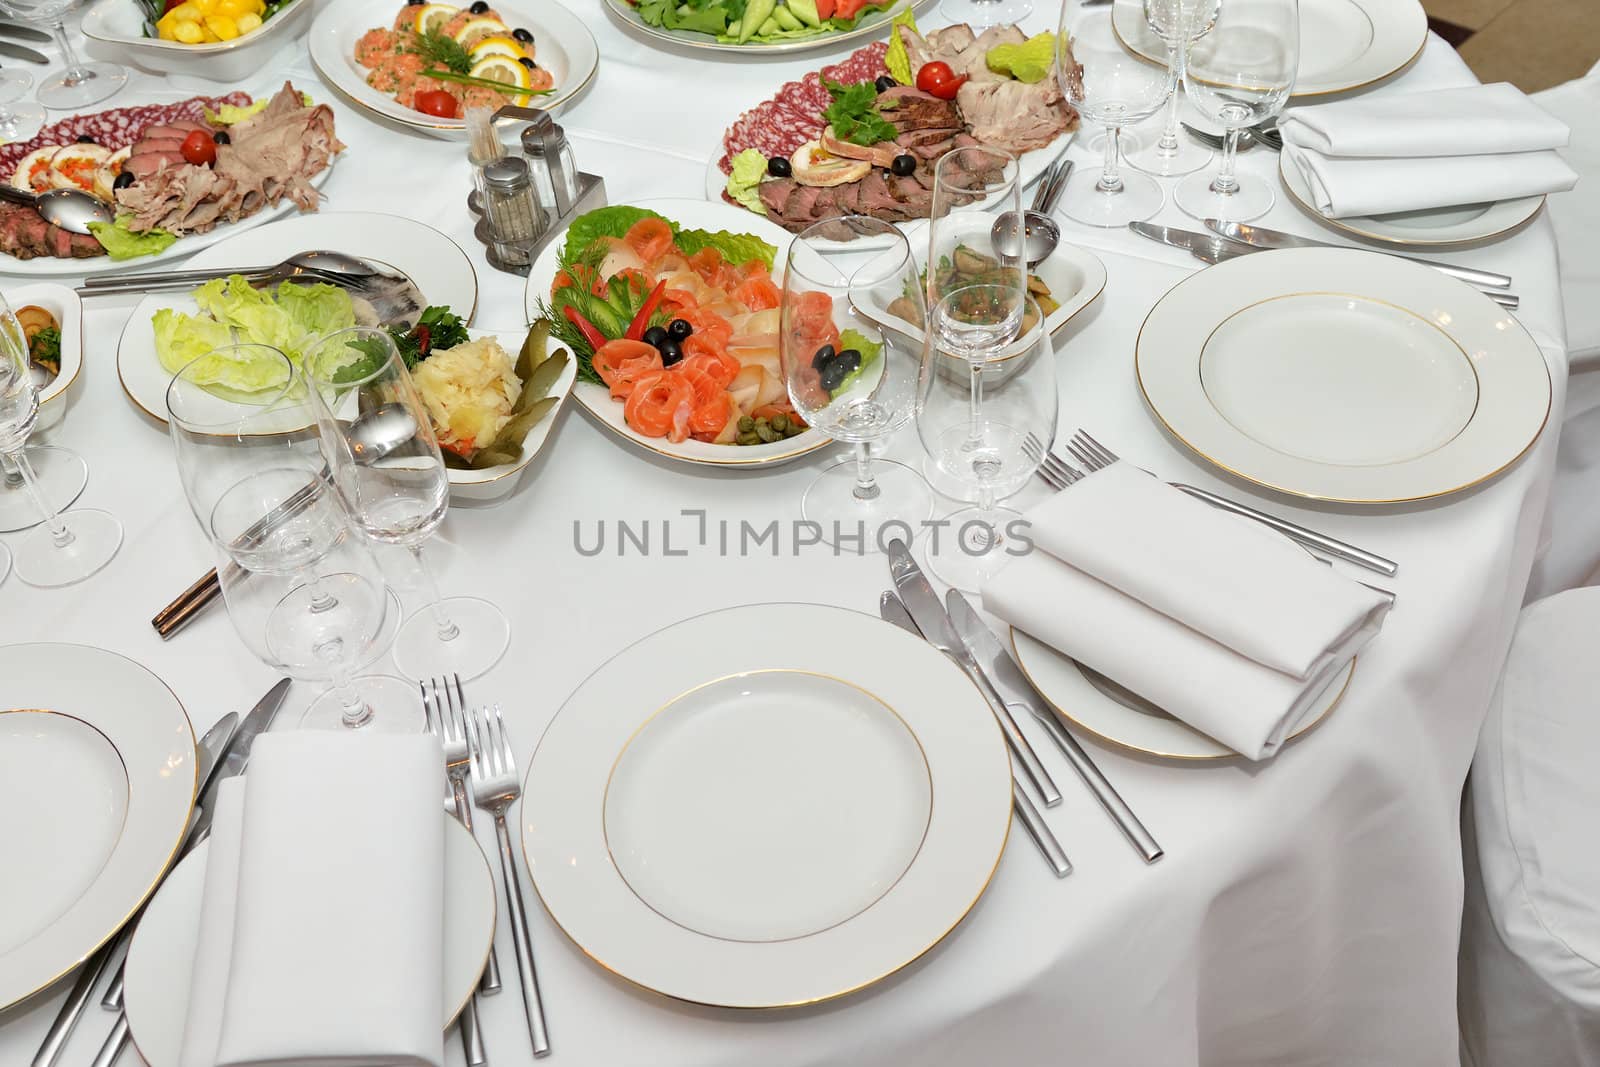 Served table with appetizers, dishes and glasses.